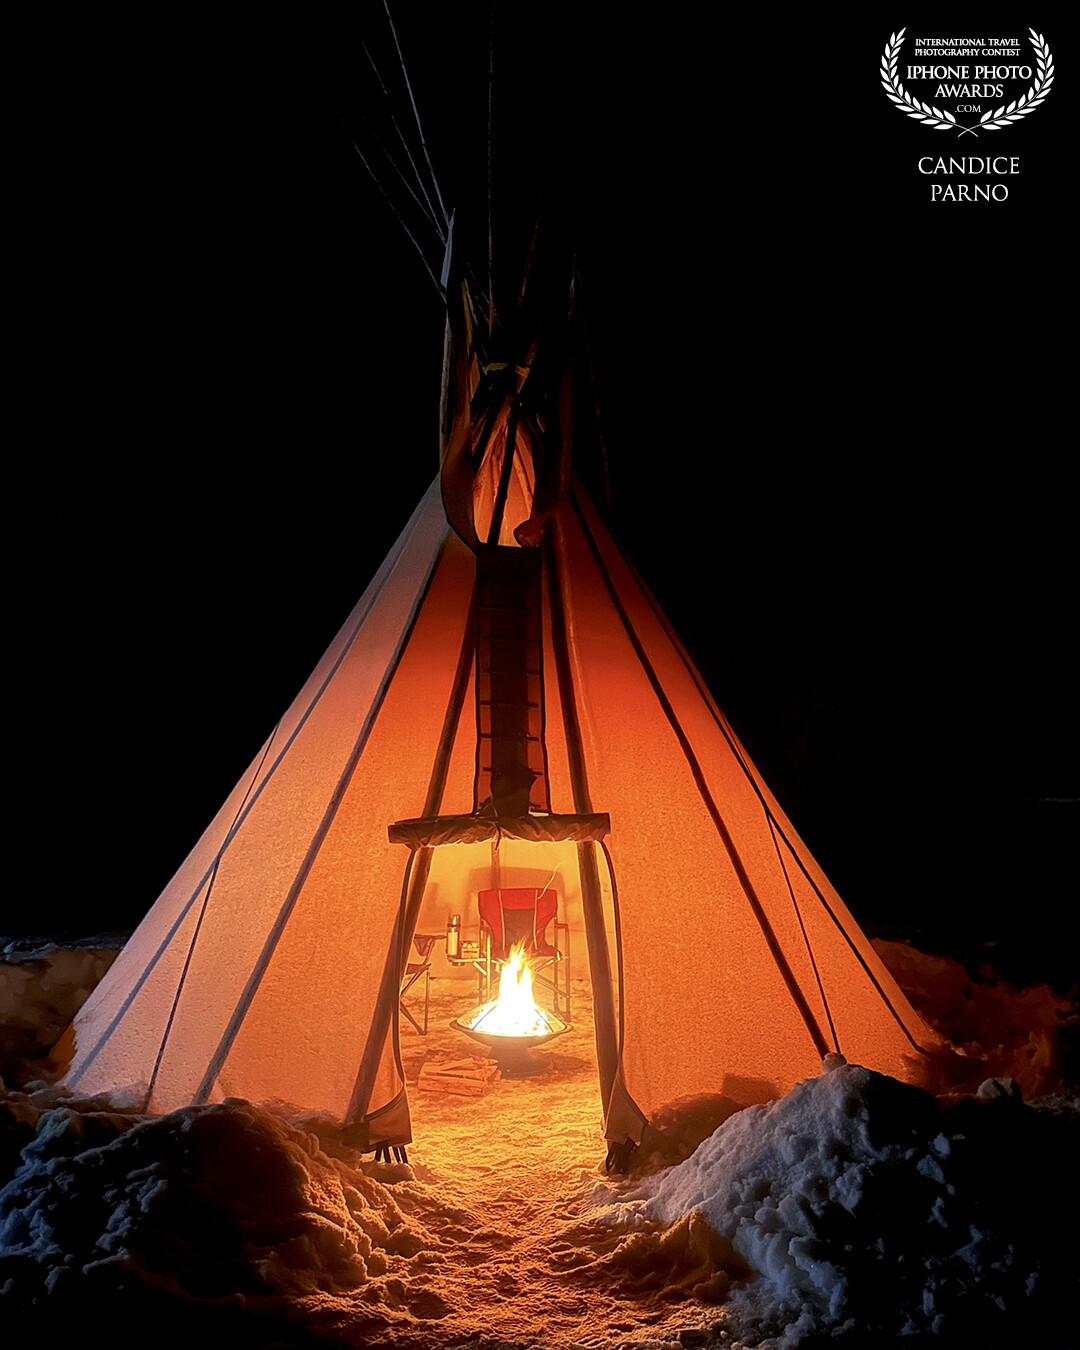 The golden glow of the fire inside the teepee was so warm and inviting…both from the inside and outside .